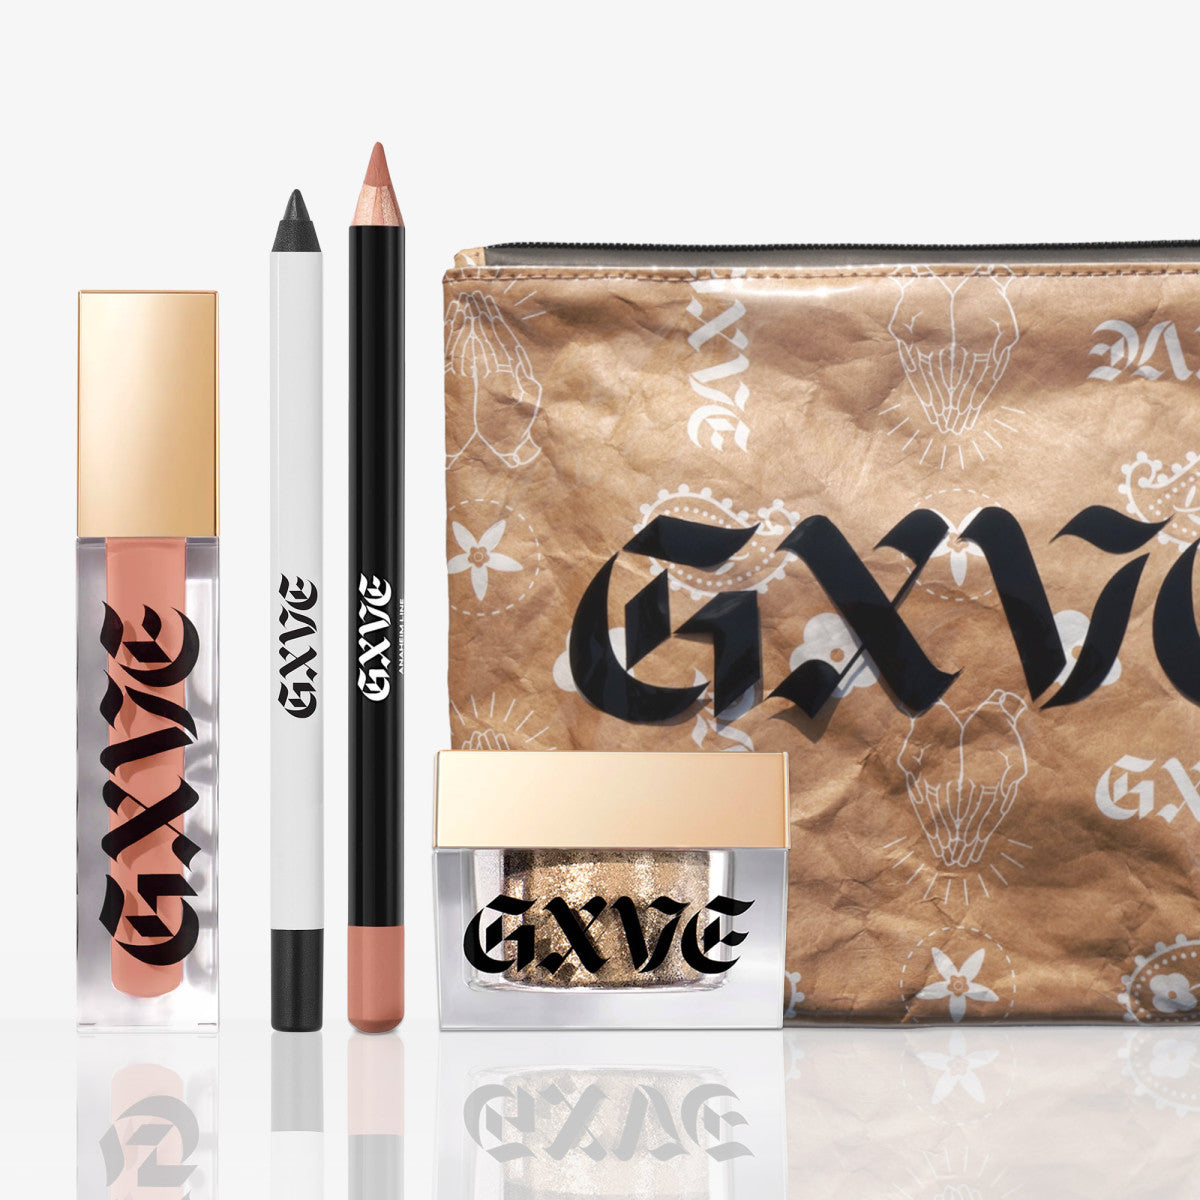 GXVE A natural touch kit with makeup bag. - 